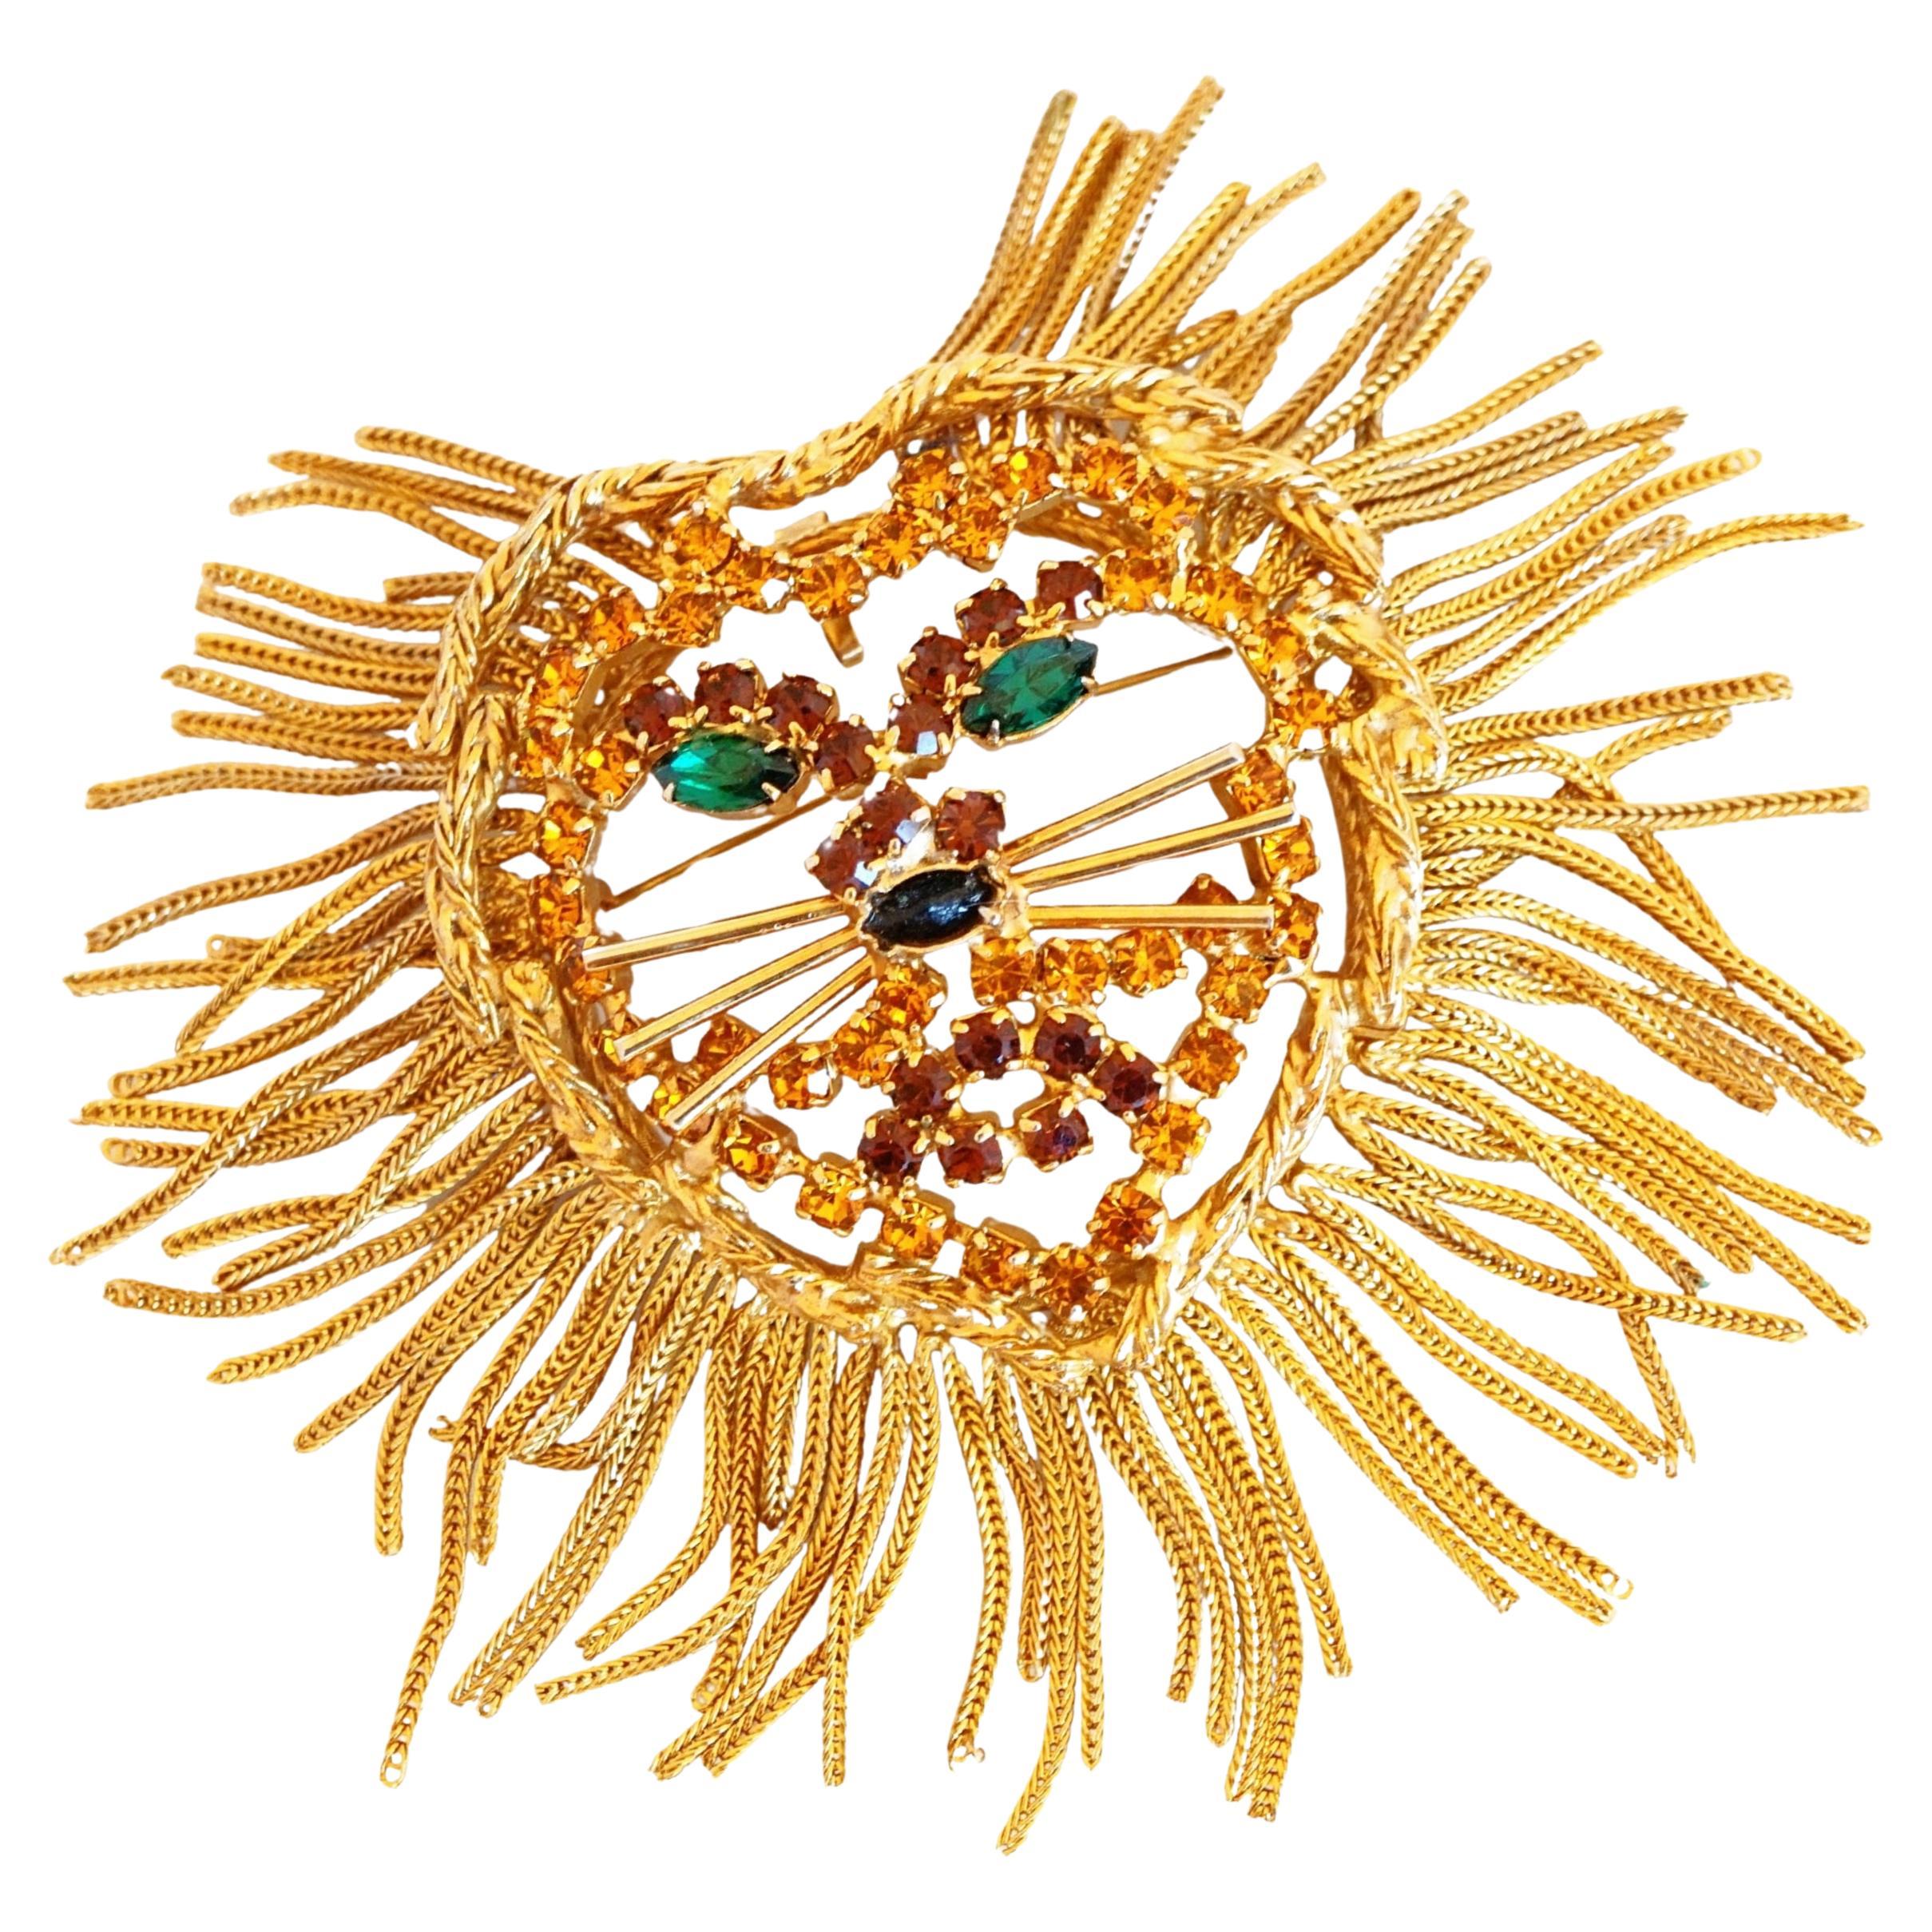 Lion Brooch With Rhinestones and Gold Chain Fringe By Dominique, 1960s For Sale